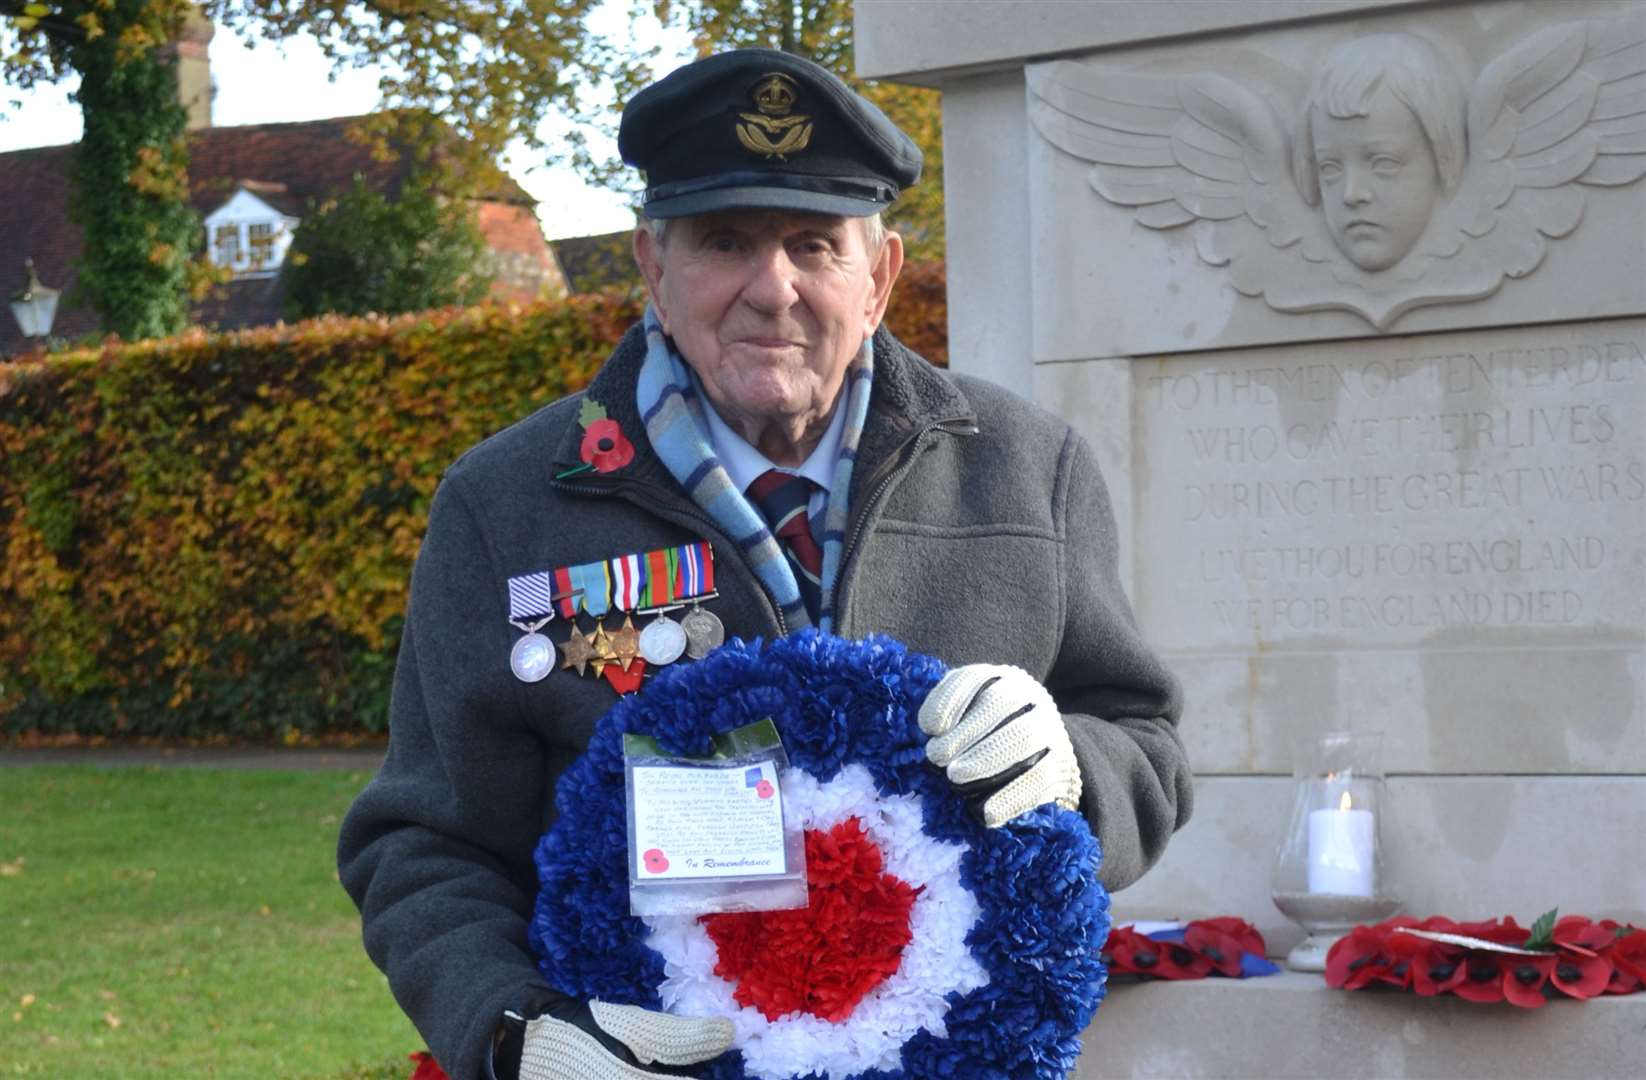 War hero Colin Deverell from Tenterden has celebrated his 100th birthday